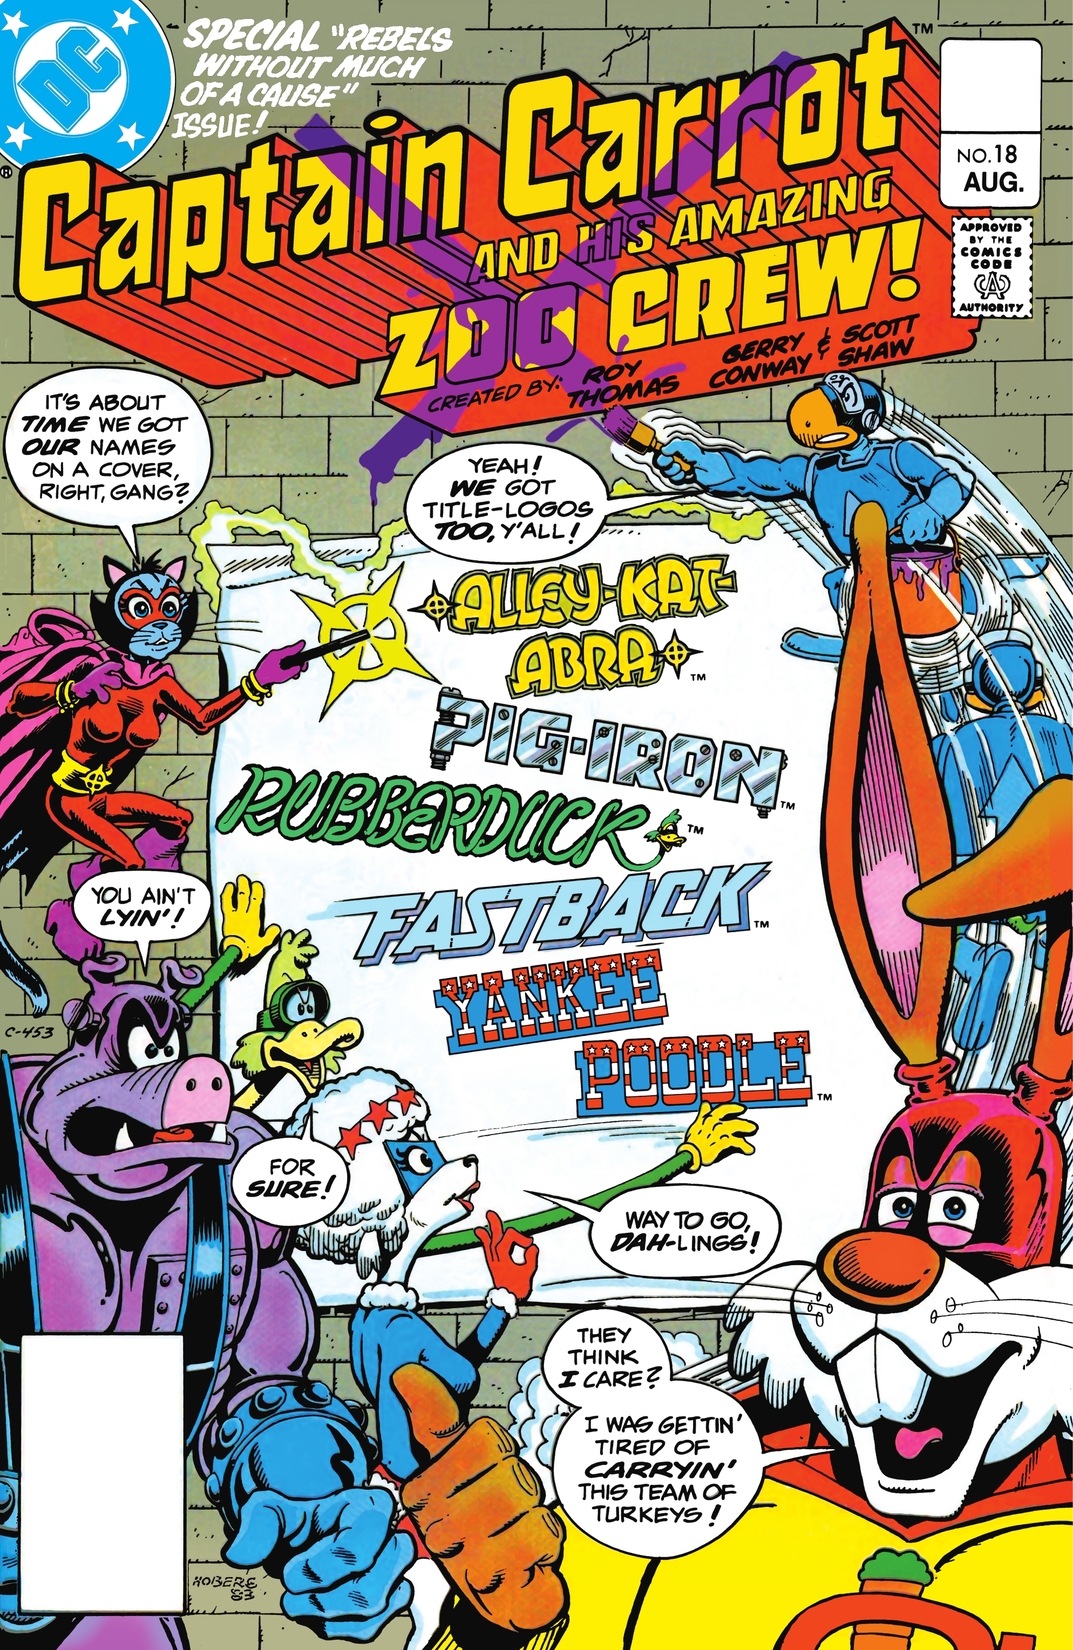 Captain Carrot and His Amazing Zoo Crew #18 preview images